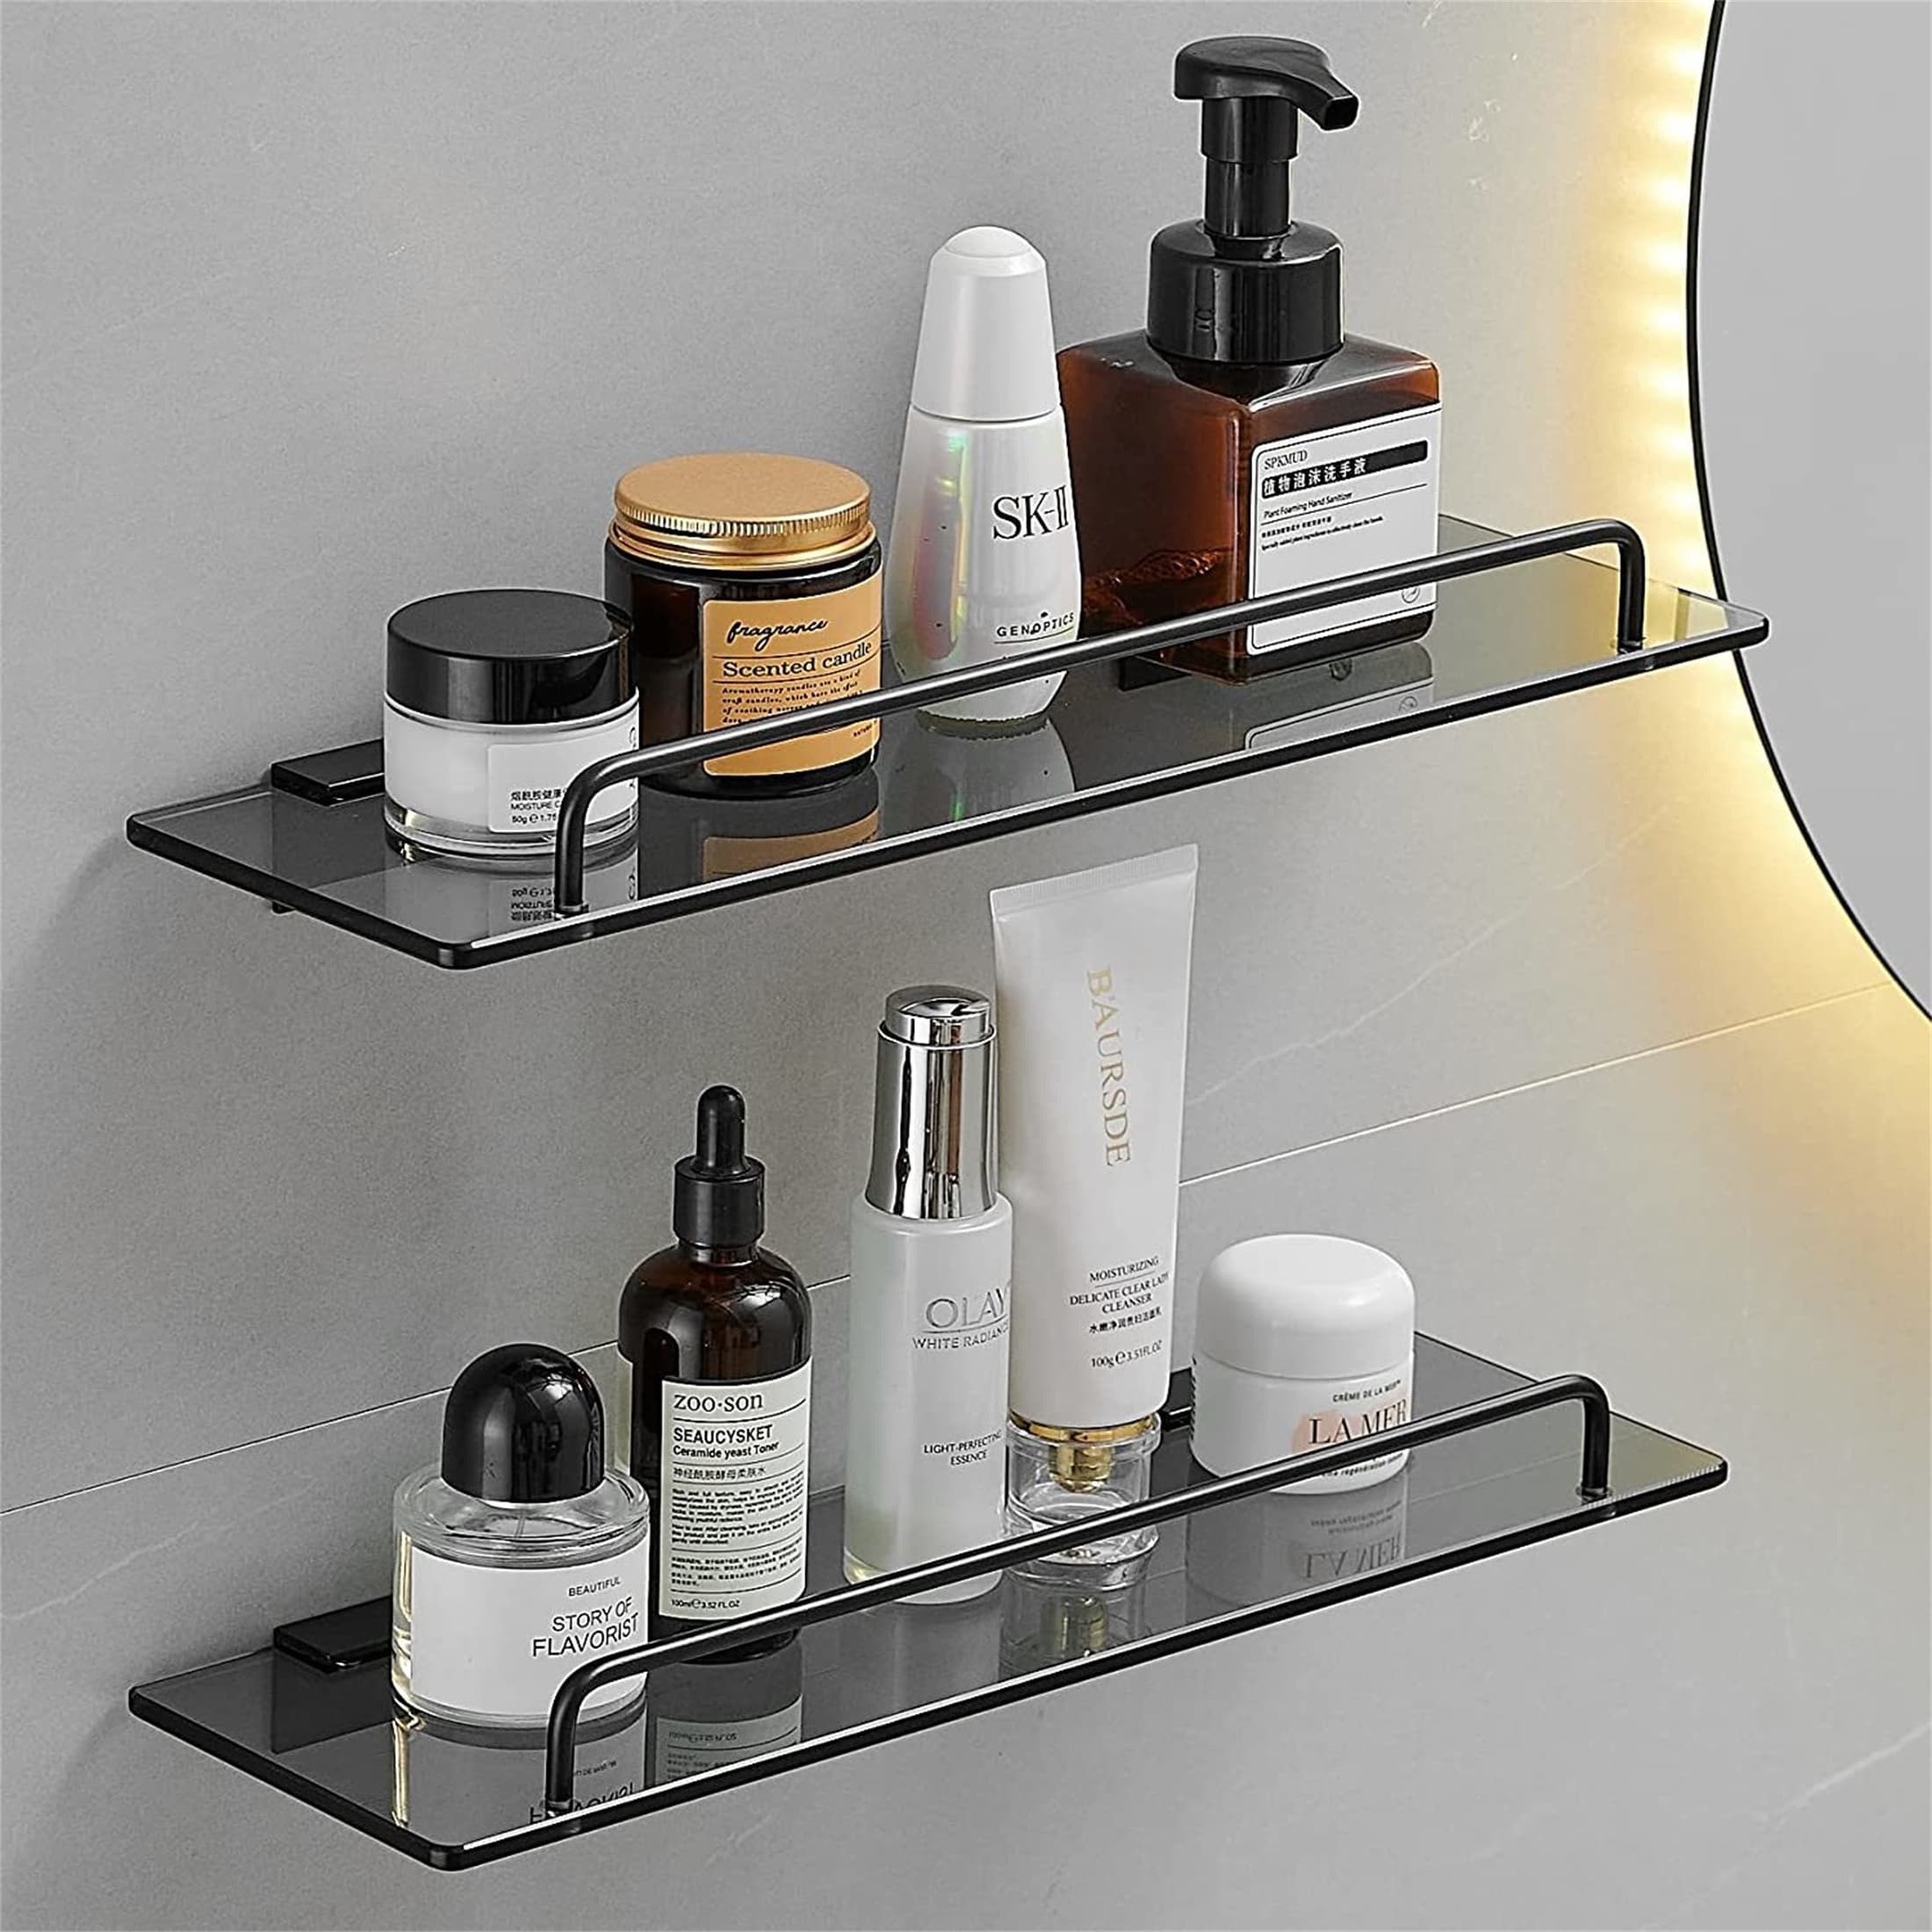 https://ak1.ostkcdn.com/images/products/is/images/direct/cf88b7d2579070be80418164d1a8b3b97eacf30c/Wall-Mounted-Tempered-Glass-Shelf-with-Rail-Floating.jpg